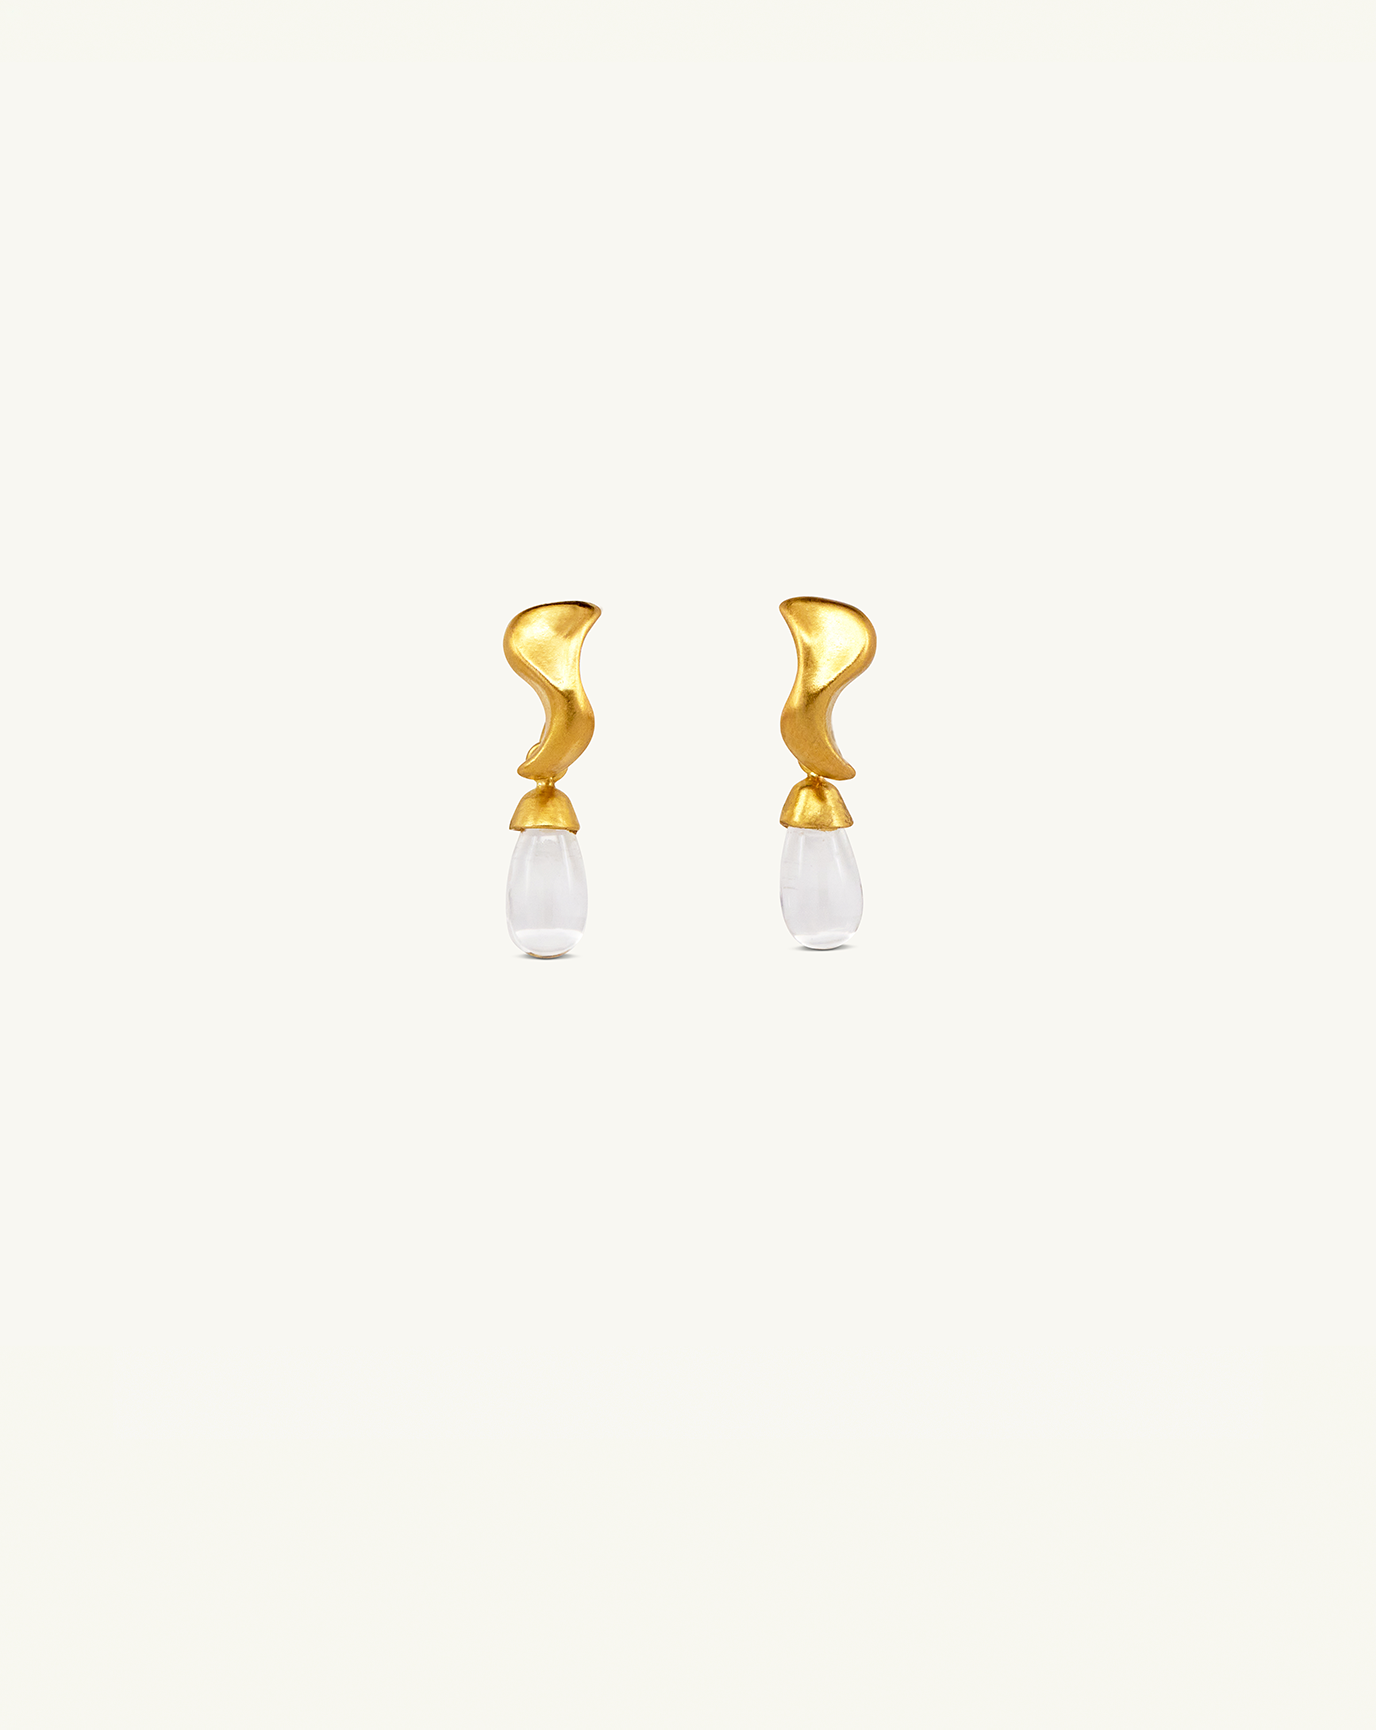 Cut out image of i seira gold and gemstone earrings